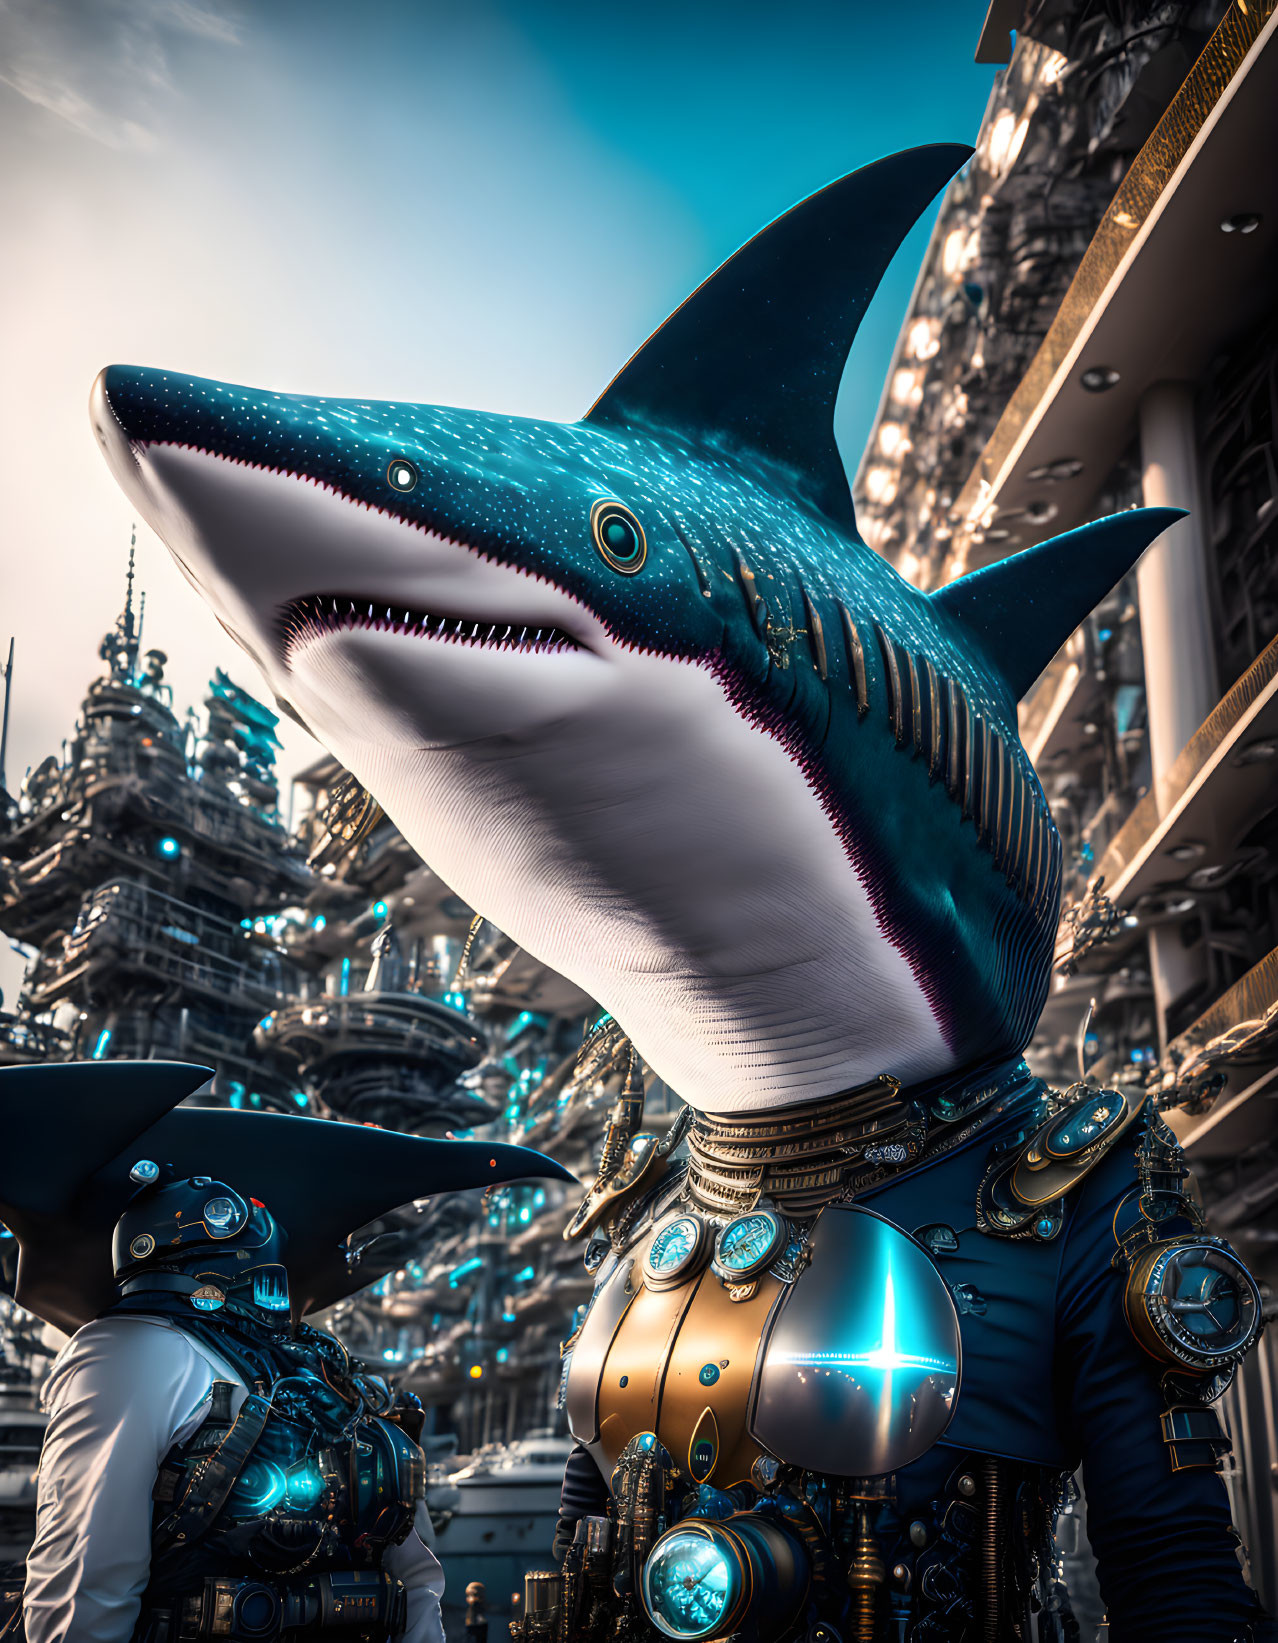 Steampunk-dressed person with shark helmet in futuristic cityscape